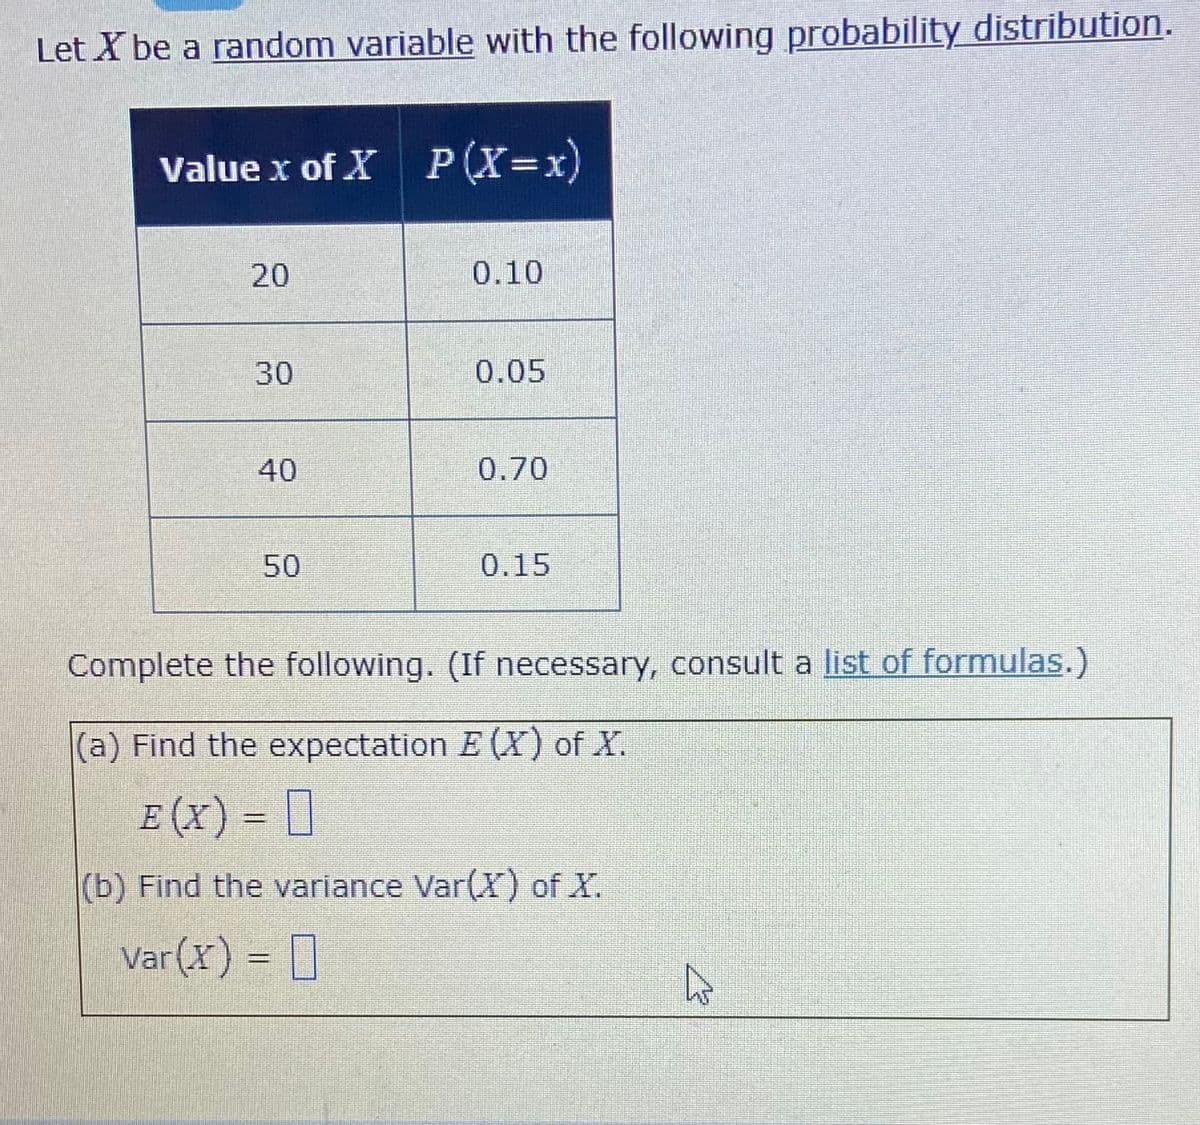 Let X be a random variable with the following probability distribution.
Value x of X P (X=x)
20
0.10
30
0.05
40
0.70
50
0.15
Complete the following. (If necessary, consult a list of formulas.)
(a) Find the expectation E (X) of X.
E (x) = []
(b) Find the variance Var(X) of X.
Var(X) = []
